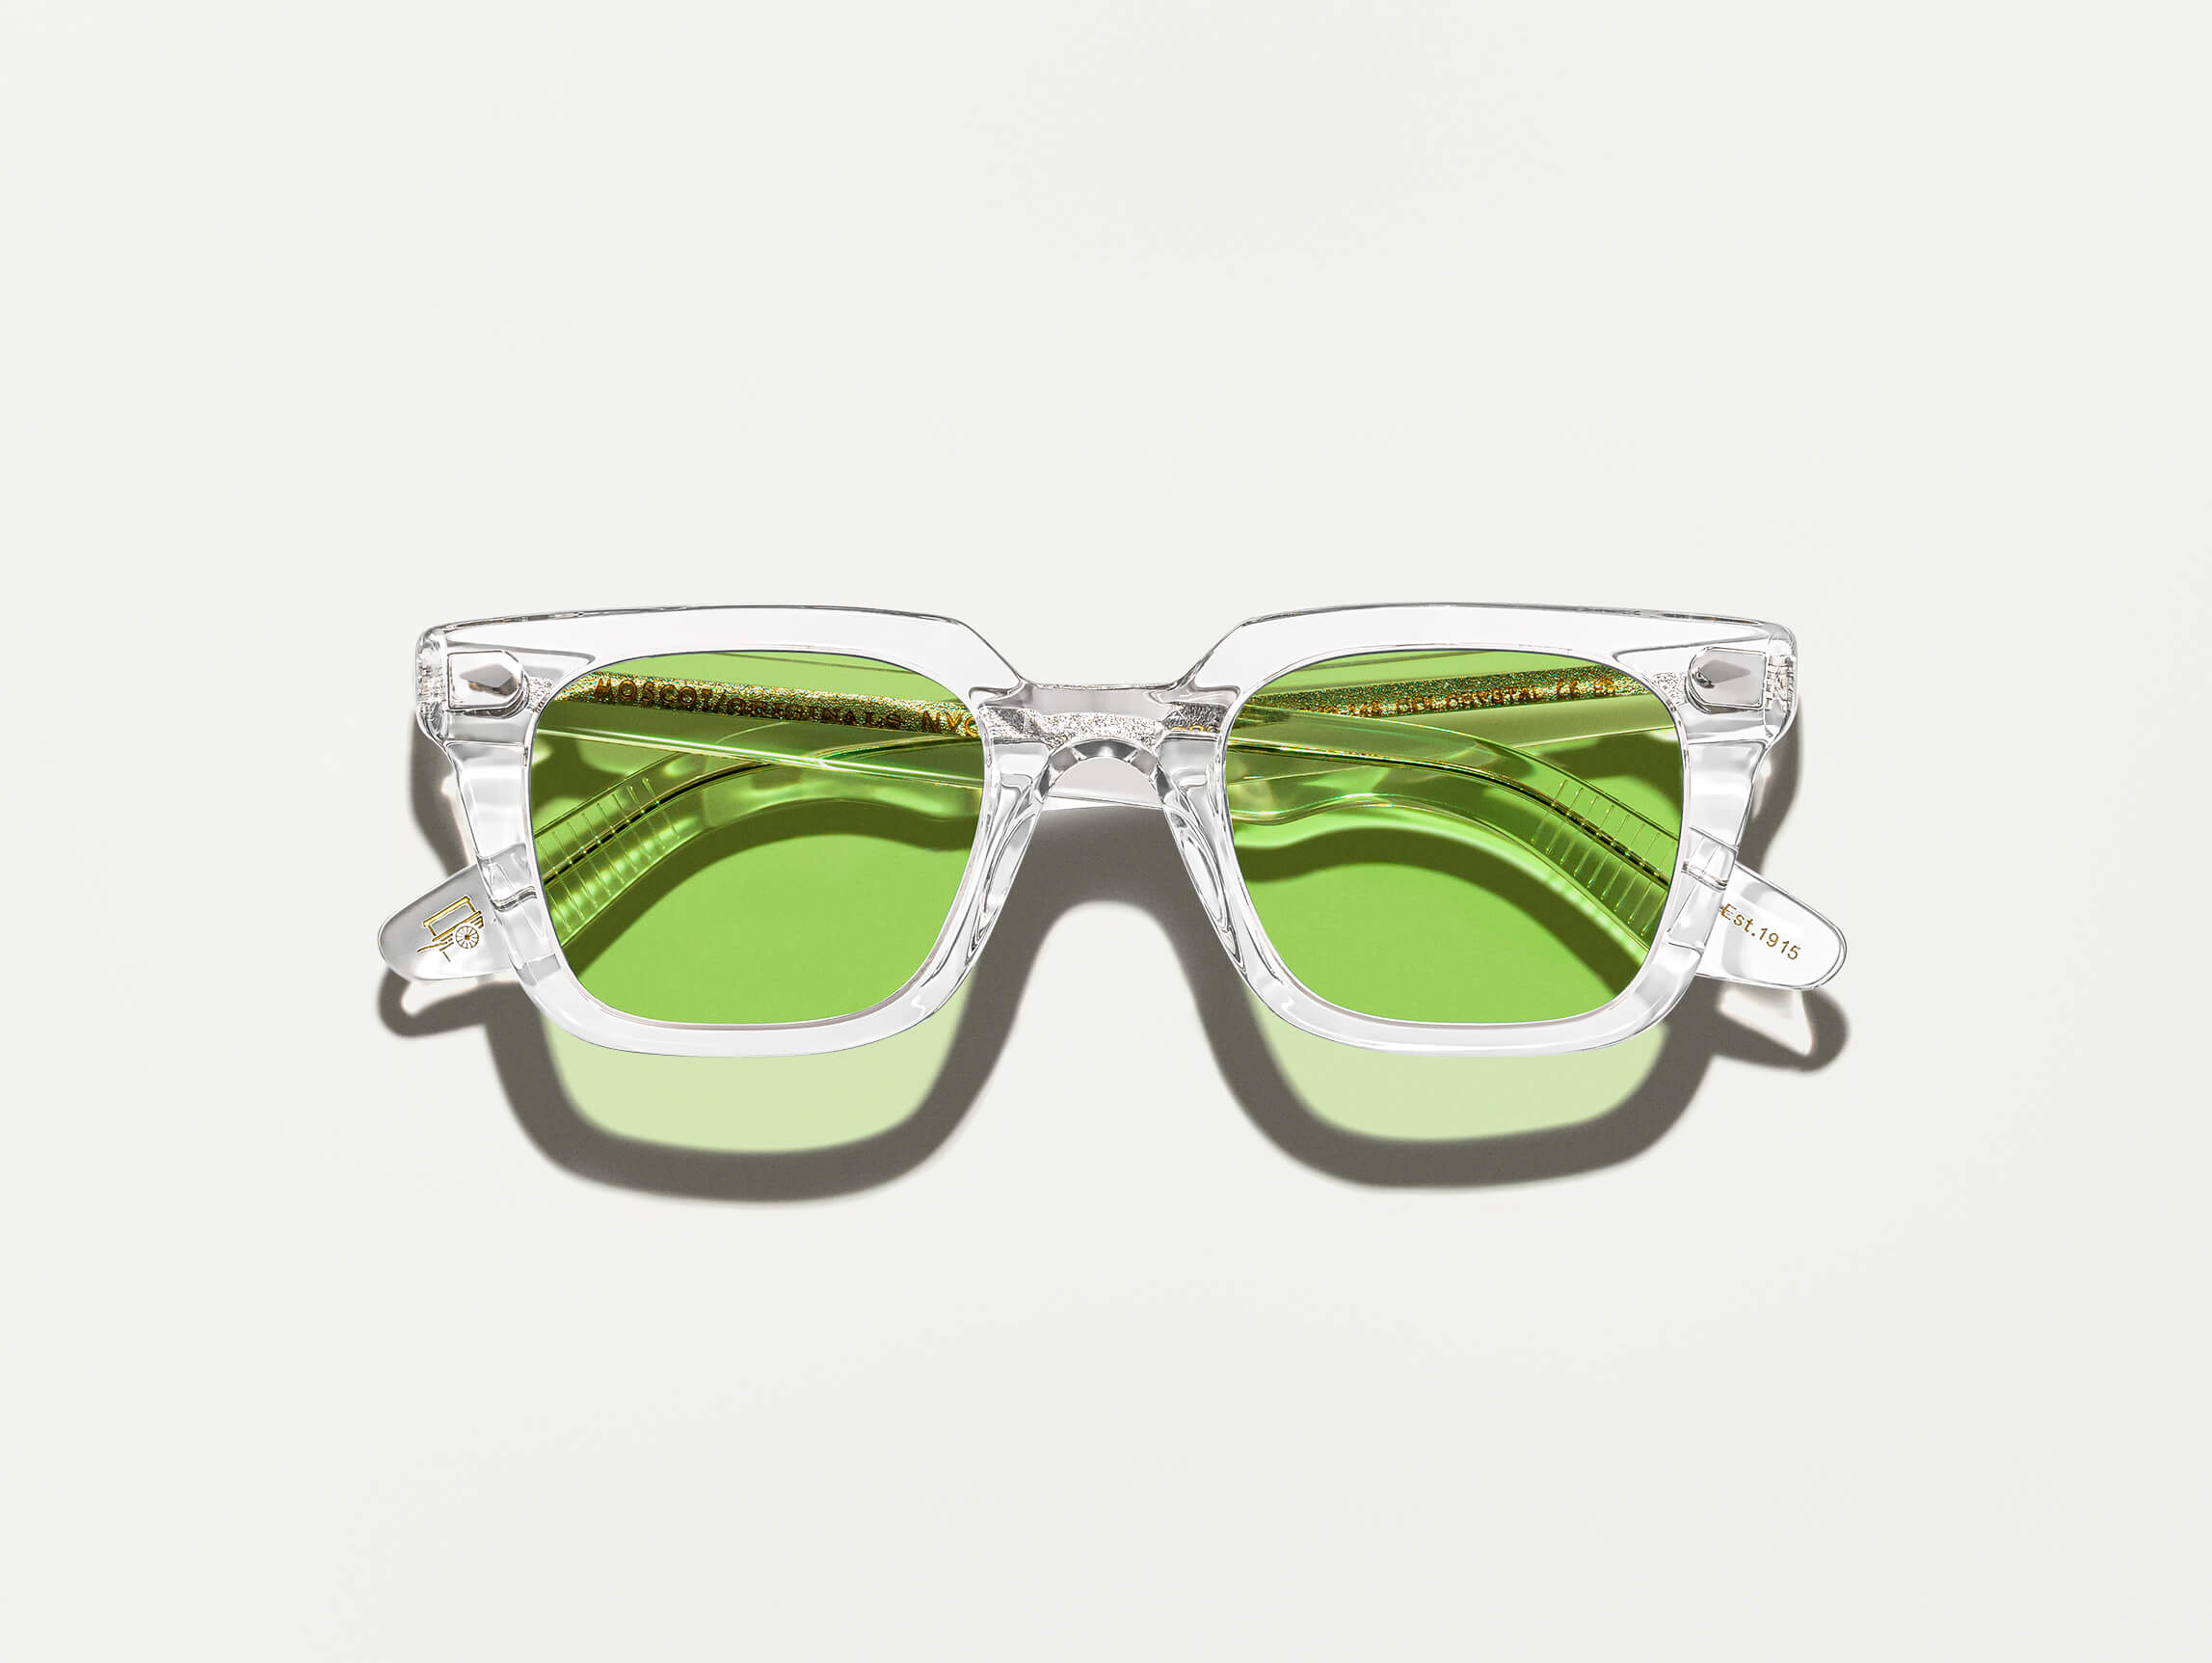 The GROBER Crystal with Garnet Green Tinted Lenses